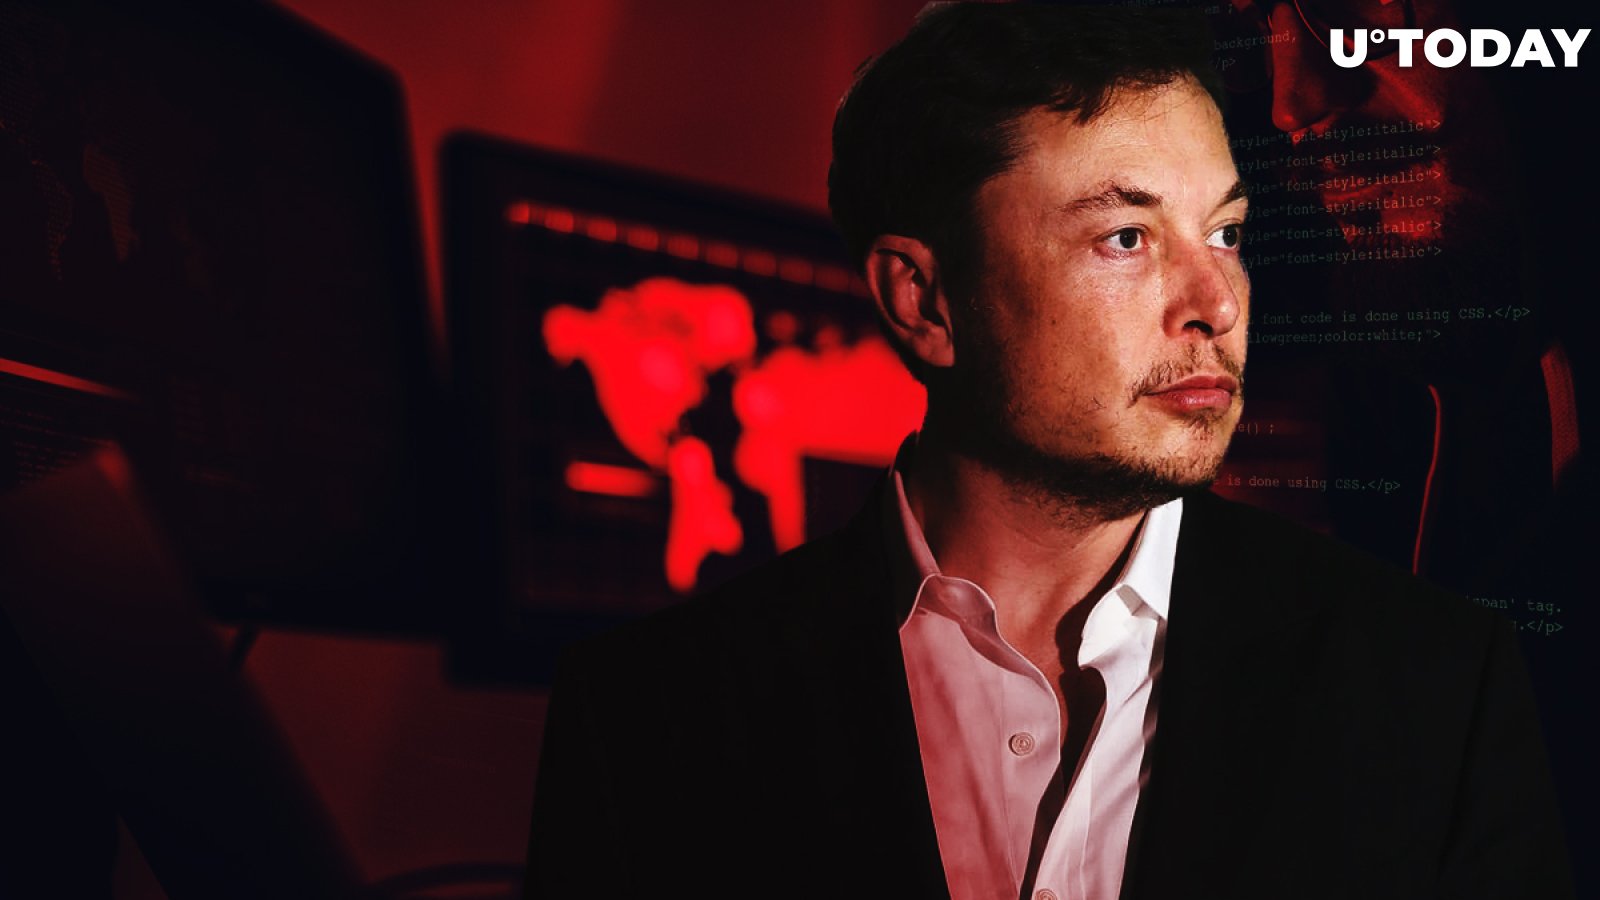 Elon Musk Gets Embroiled in Crypto Scam That Offers Tesla Model S